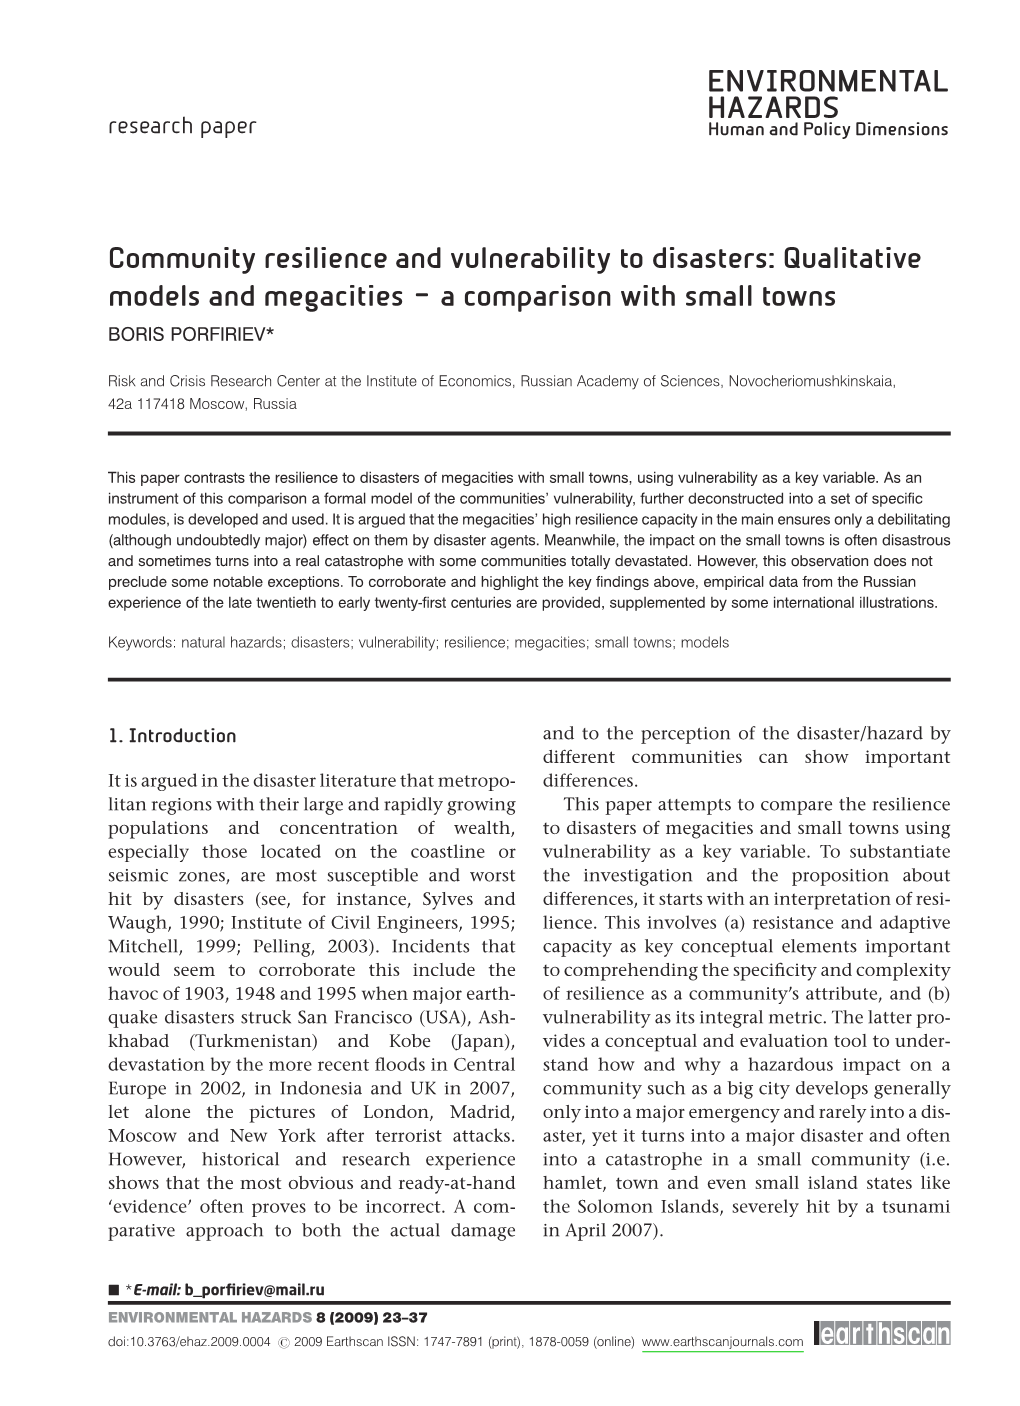 Community Resilience and Vulnerability to Disasters: Qualitative Models and Megacities – a Comparison with Small Towns BORIS PORFIRIEV*